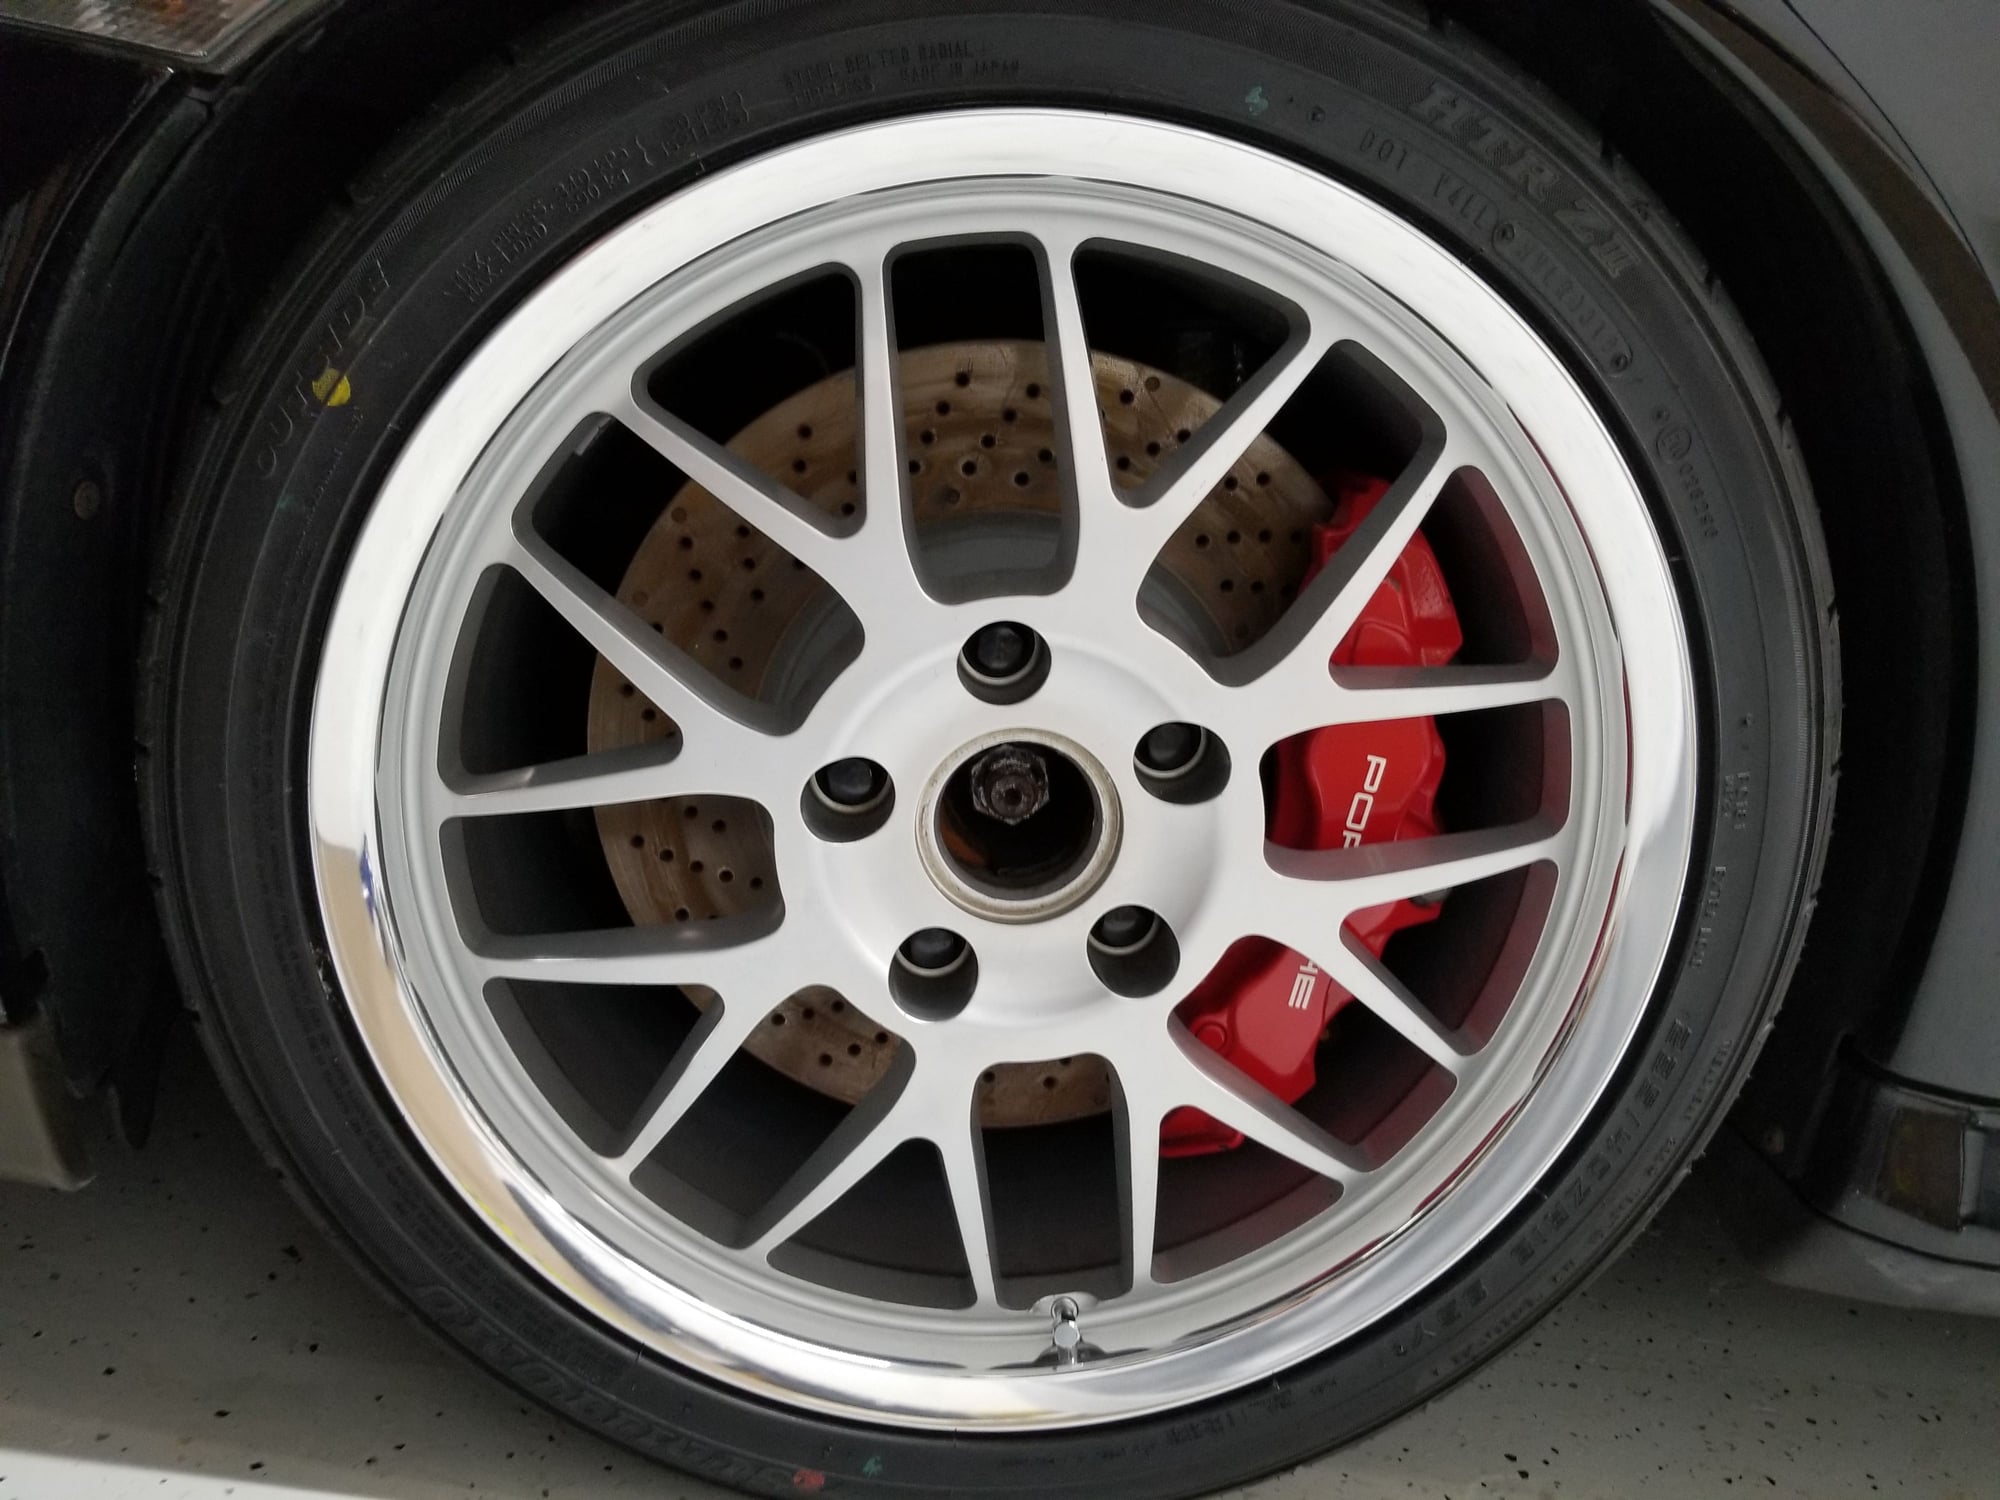 Wheels and Tires/Axles - 18" Champion RG5 - Widebody (996/997) - Used - Wesley Chapel, FL 33543, United States